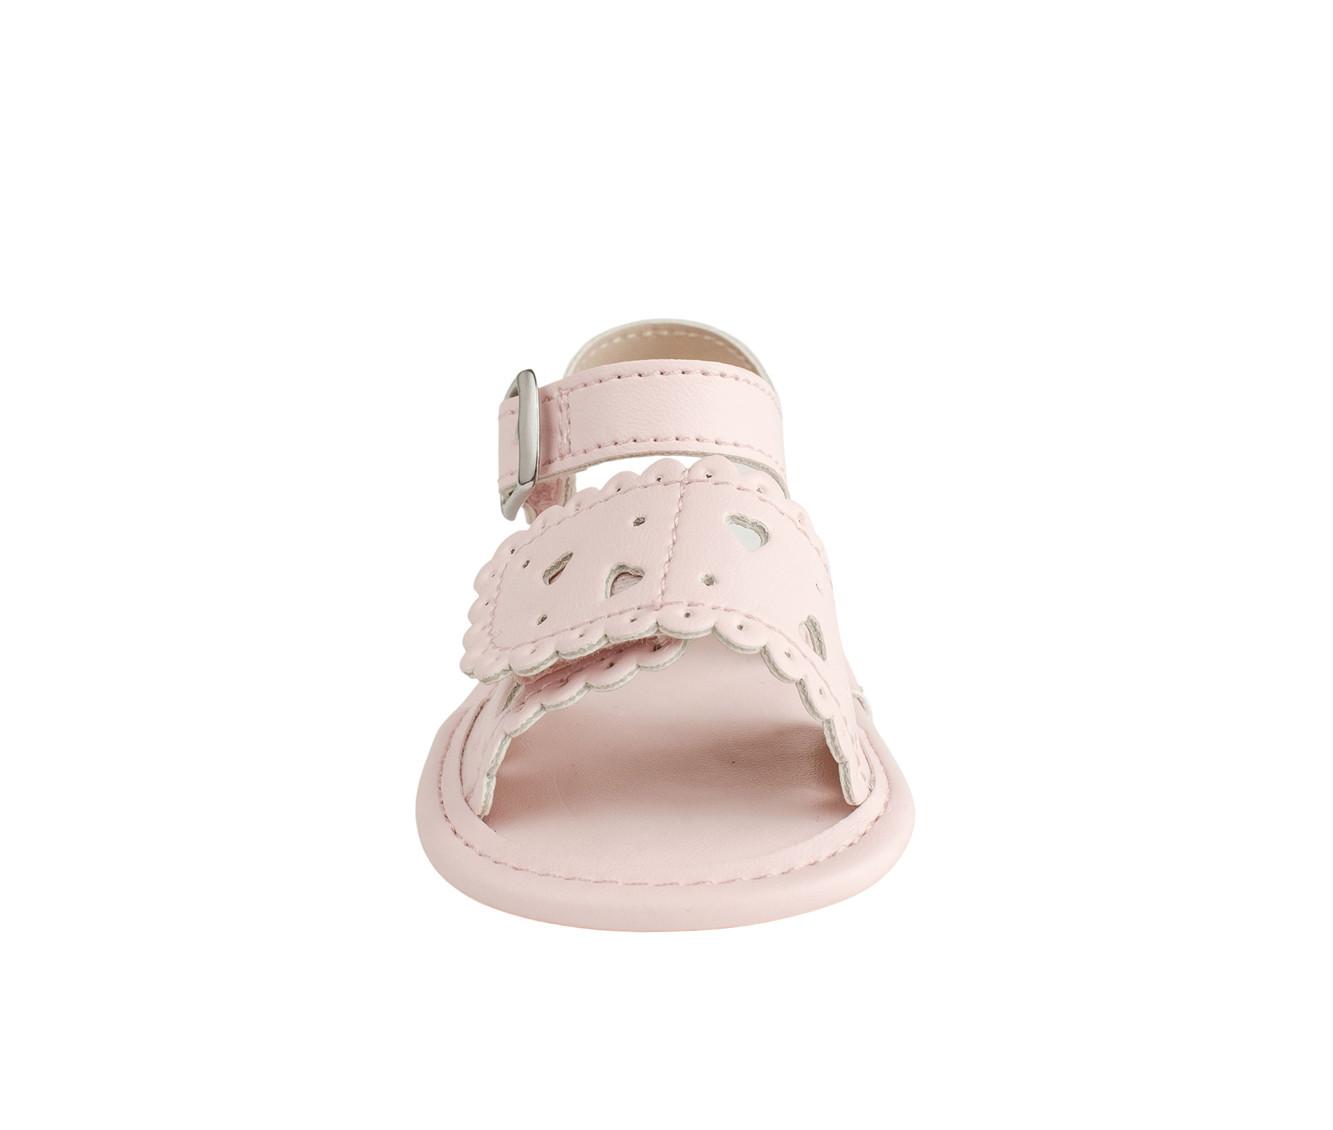 Girls' Baby Deer Infant Patricia Crib Shoes Sandals